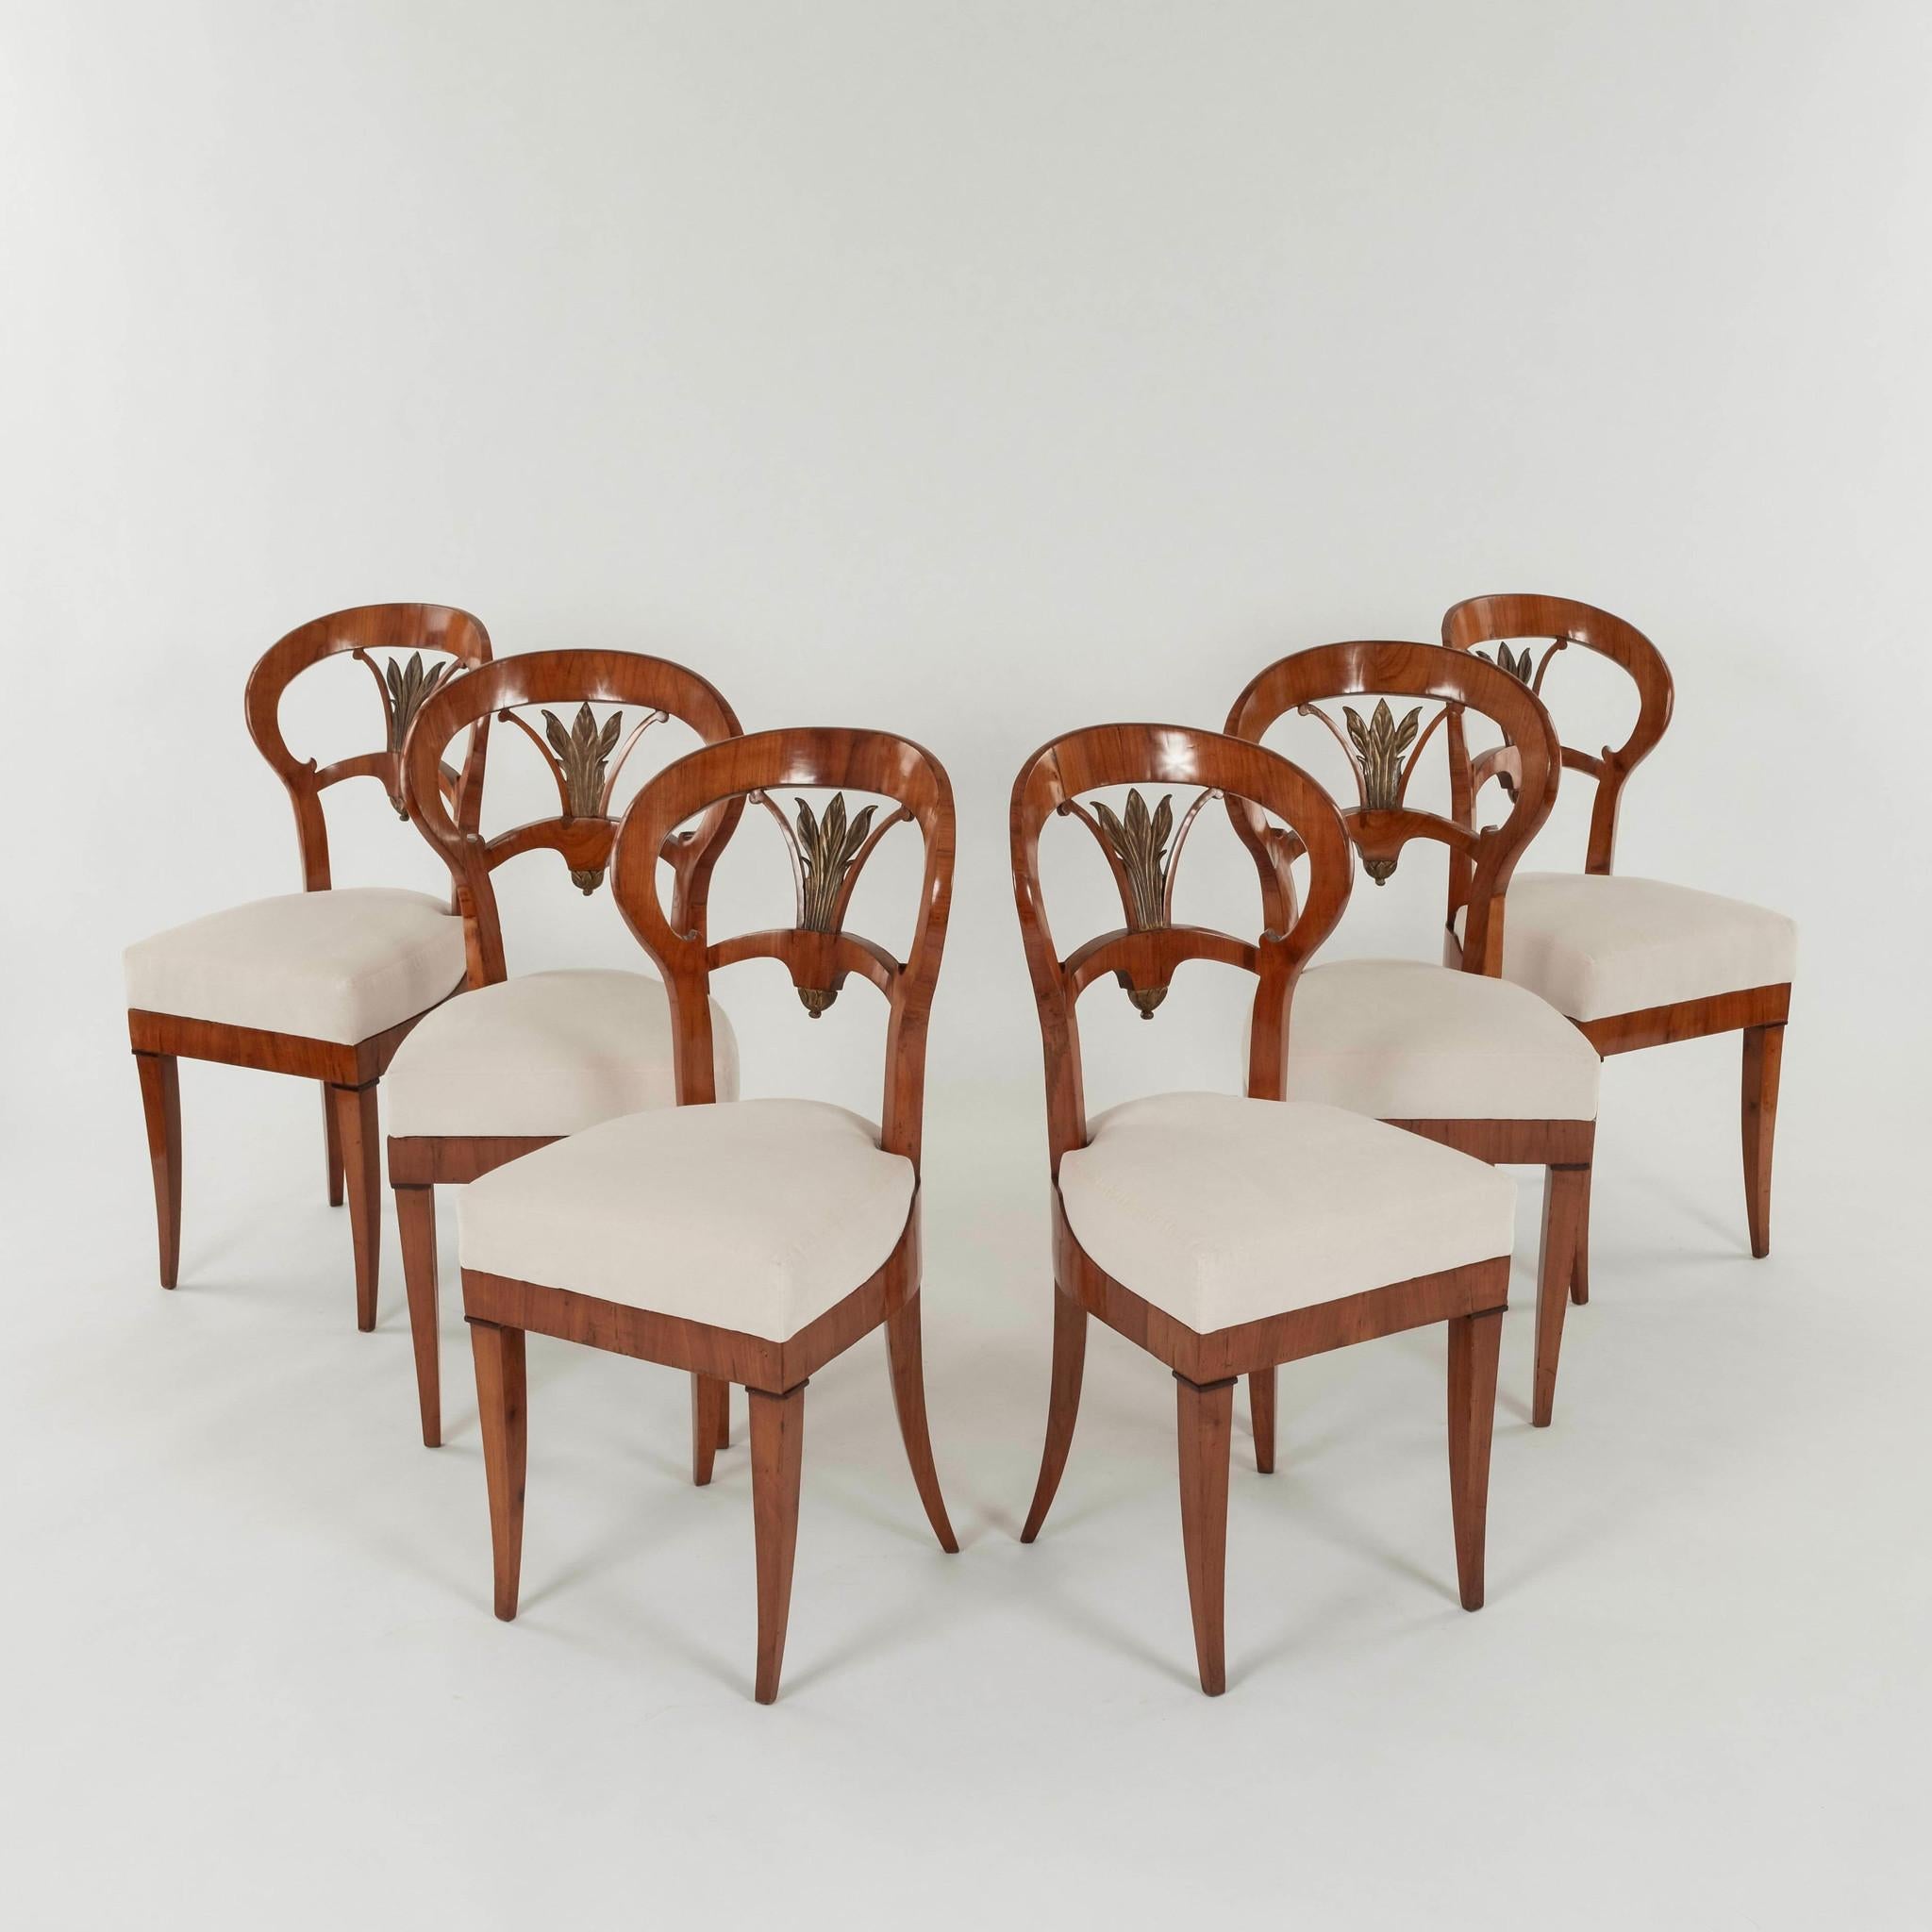 Set six  period Biedermeier dining chairs. These handsome chair  feature hand carved detailing, mixed woods, gilding and newly upholstered seats.